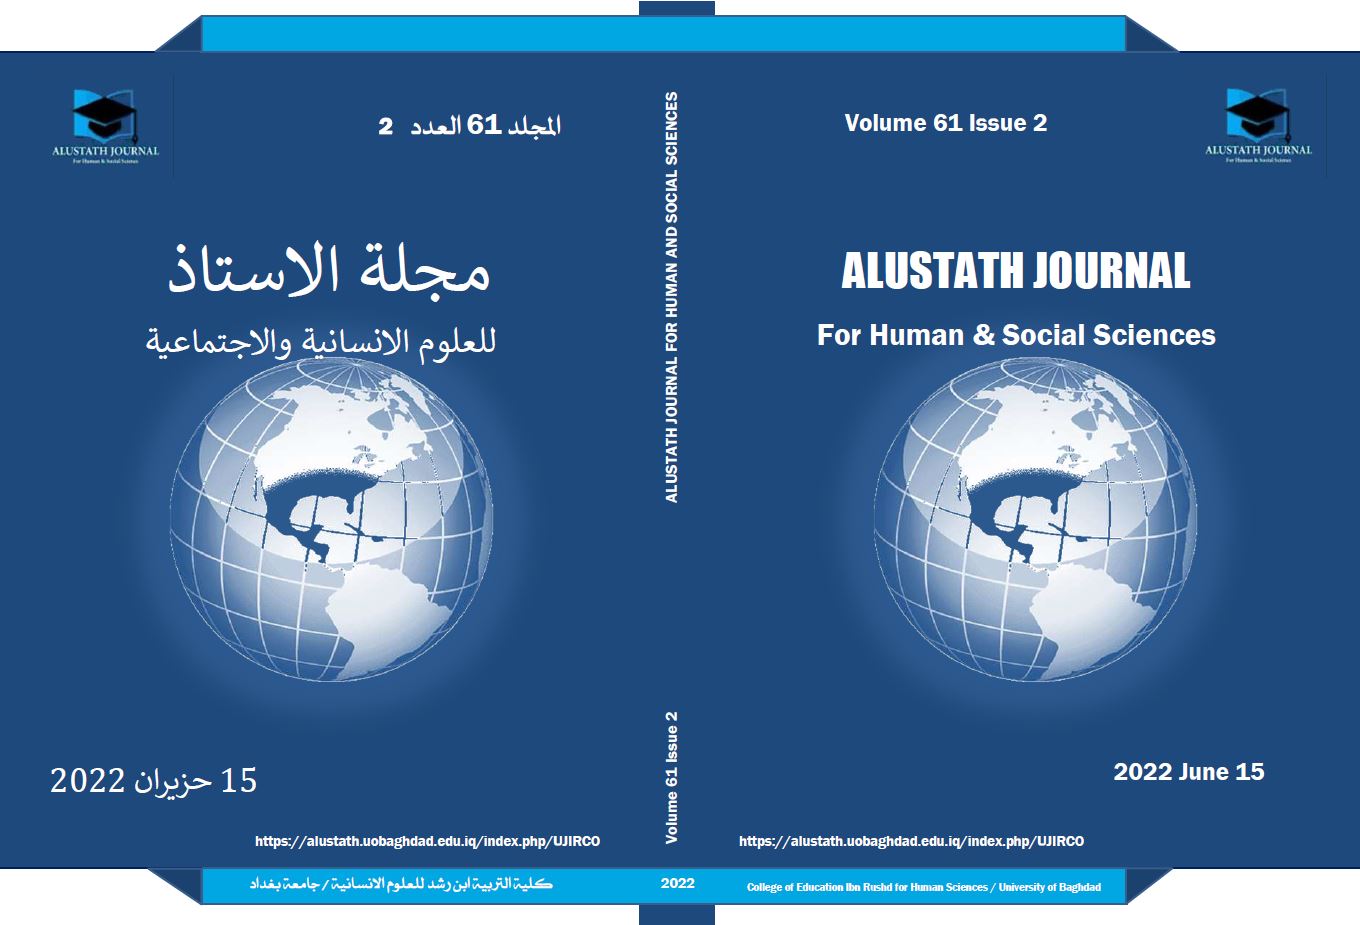 					View Vol. 61 No. 2 (2022): Alustath Journal for Human and Social Sciences 
				